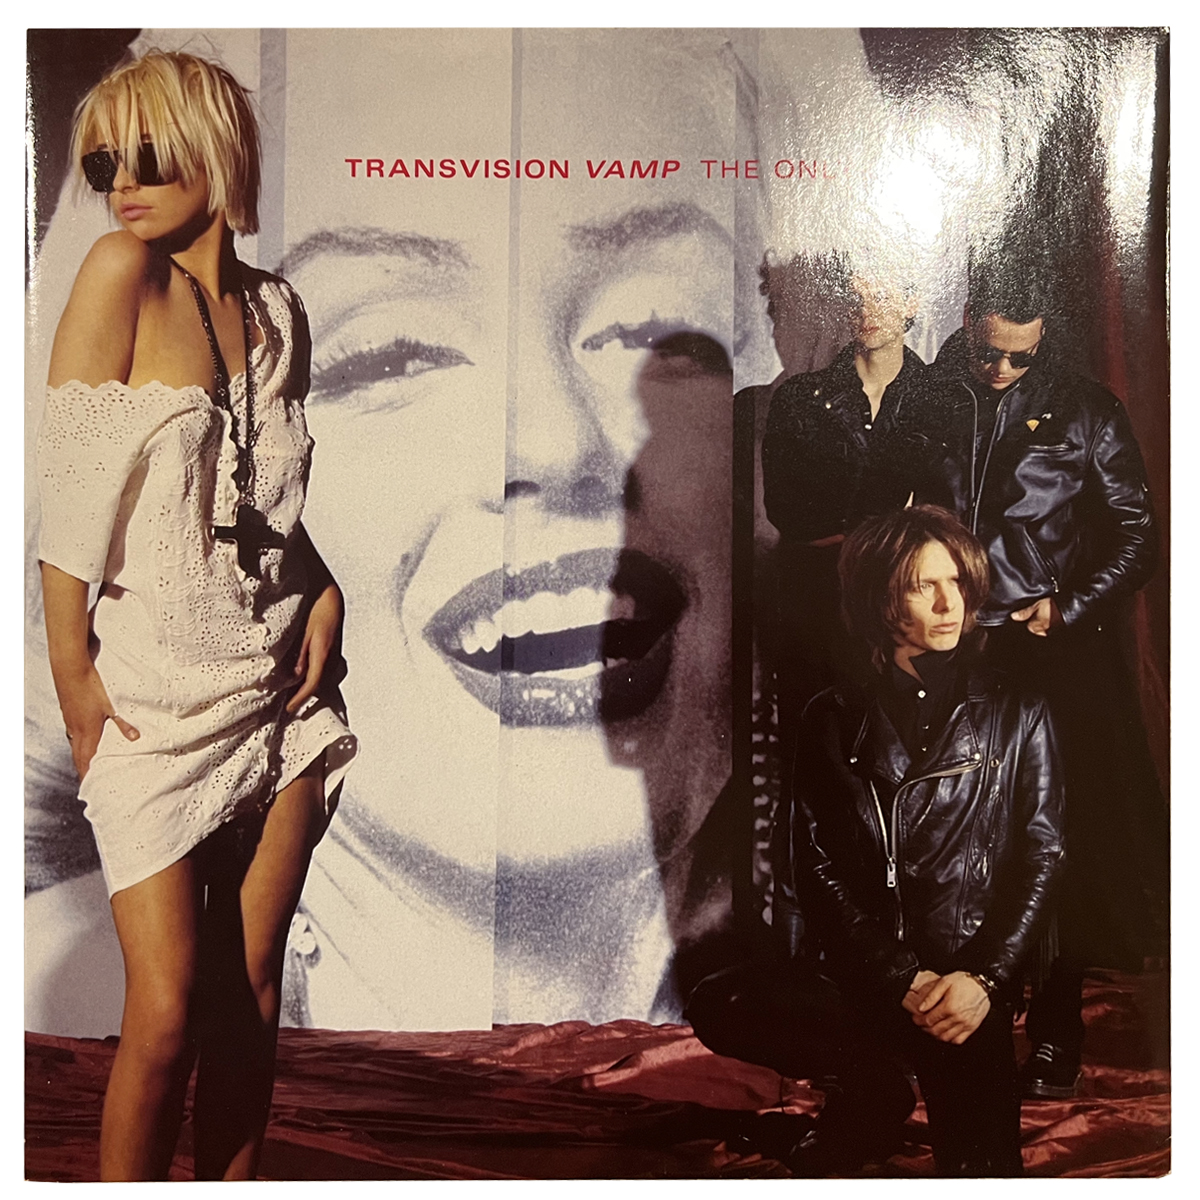 TRANSVISION VAMP ‘THE ONLY ONE’ 12” VINYL SINGLE 1989 *SIGNED & PERSONALIZED